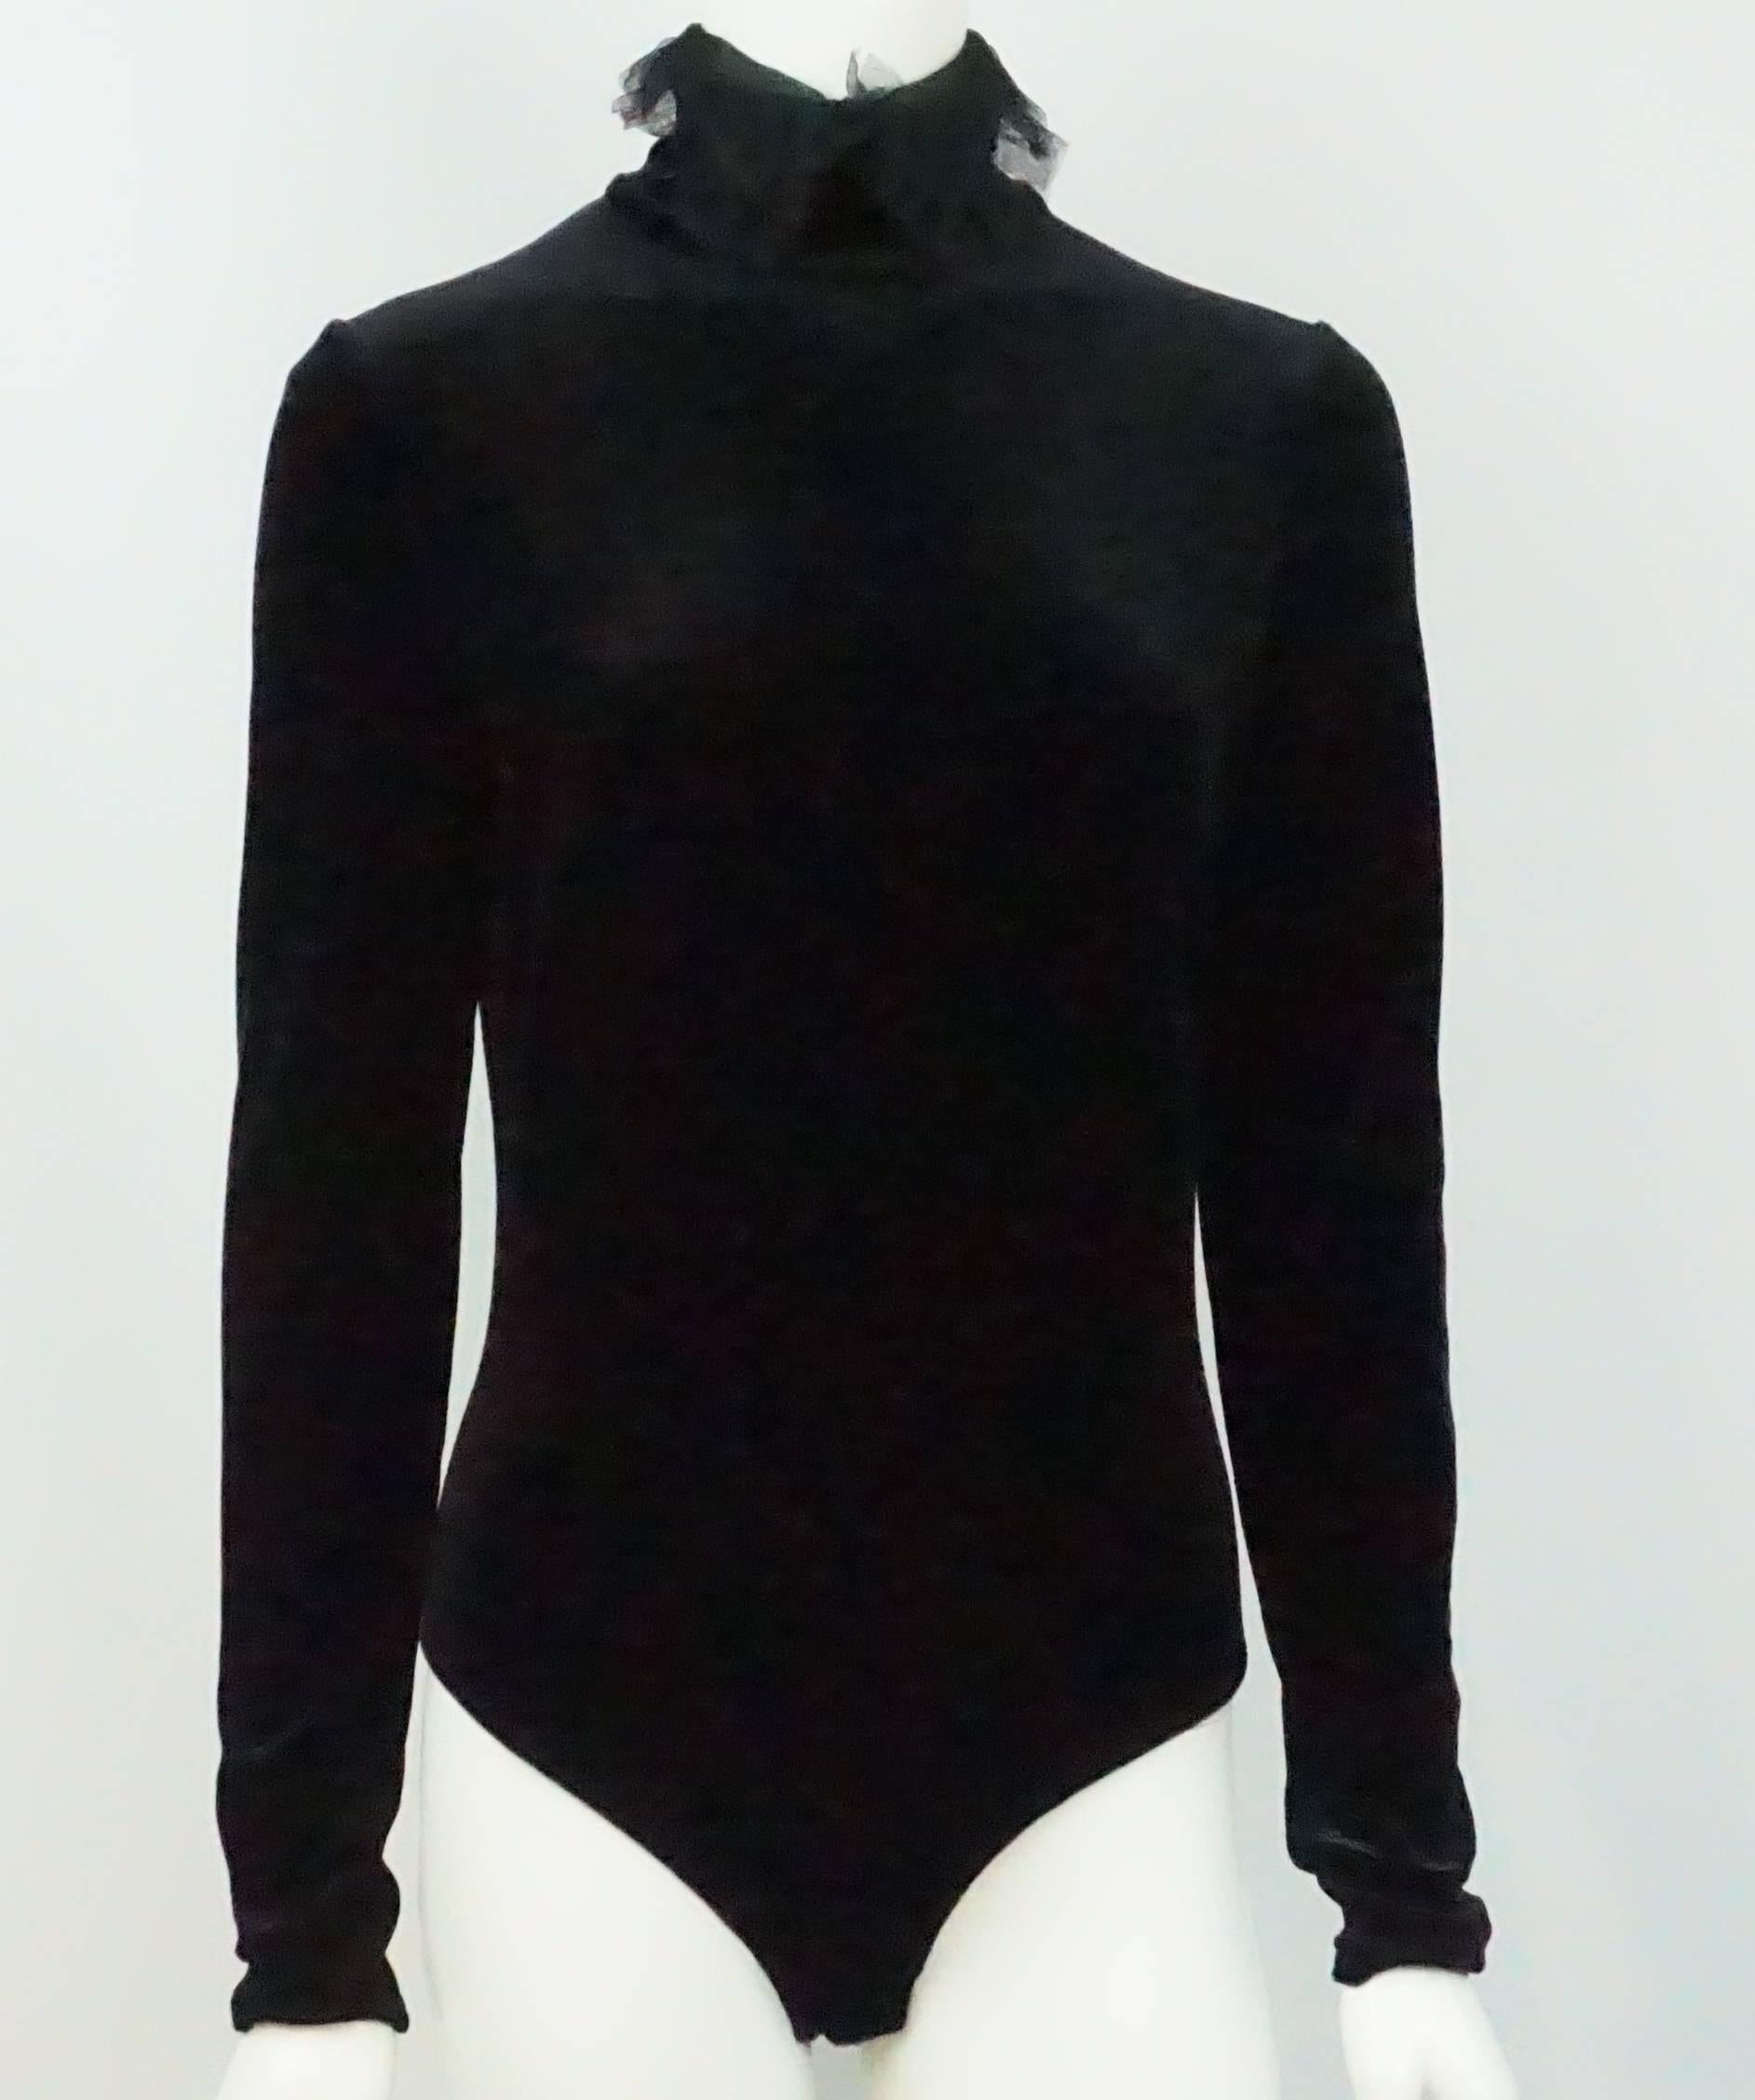 Christian Dior Black Velvet Bodysuit - 42 - Circa 70's  The blast from the past Dior Black velvet bodysuit has a high turtleneck collar with a lace detail. It has a back zipper as well as two snaps at the crotch area.  This velvet piece is a must